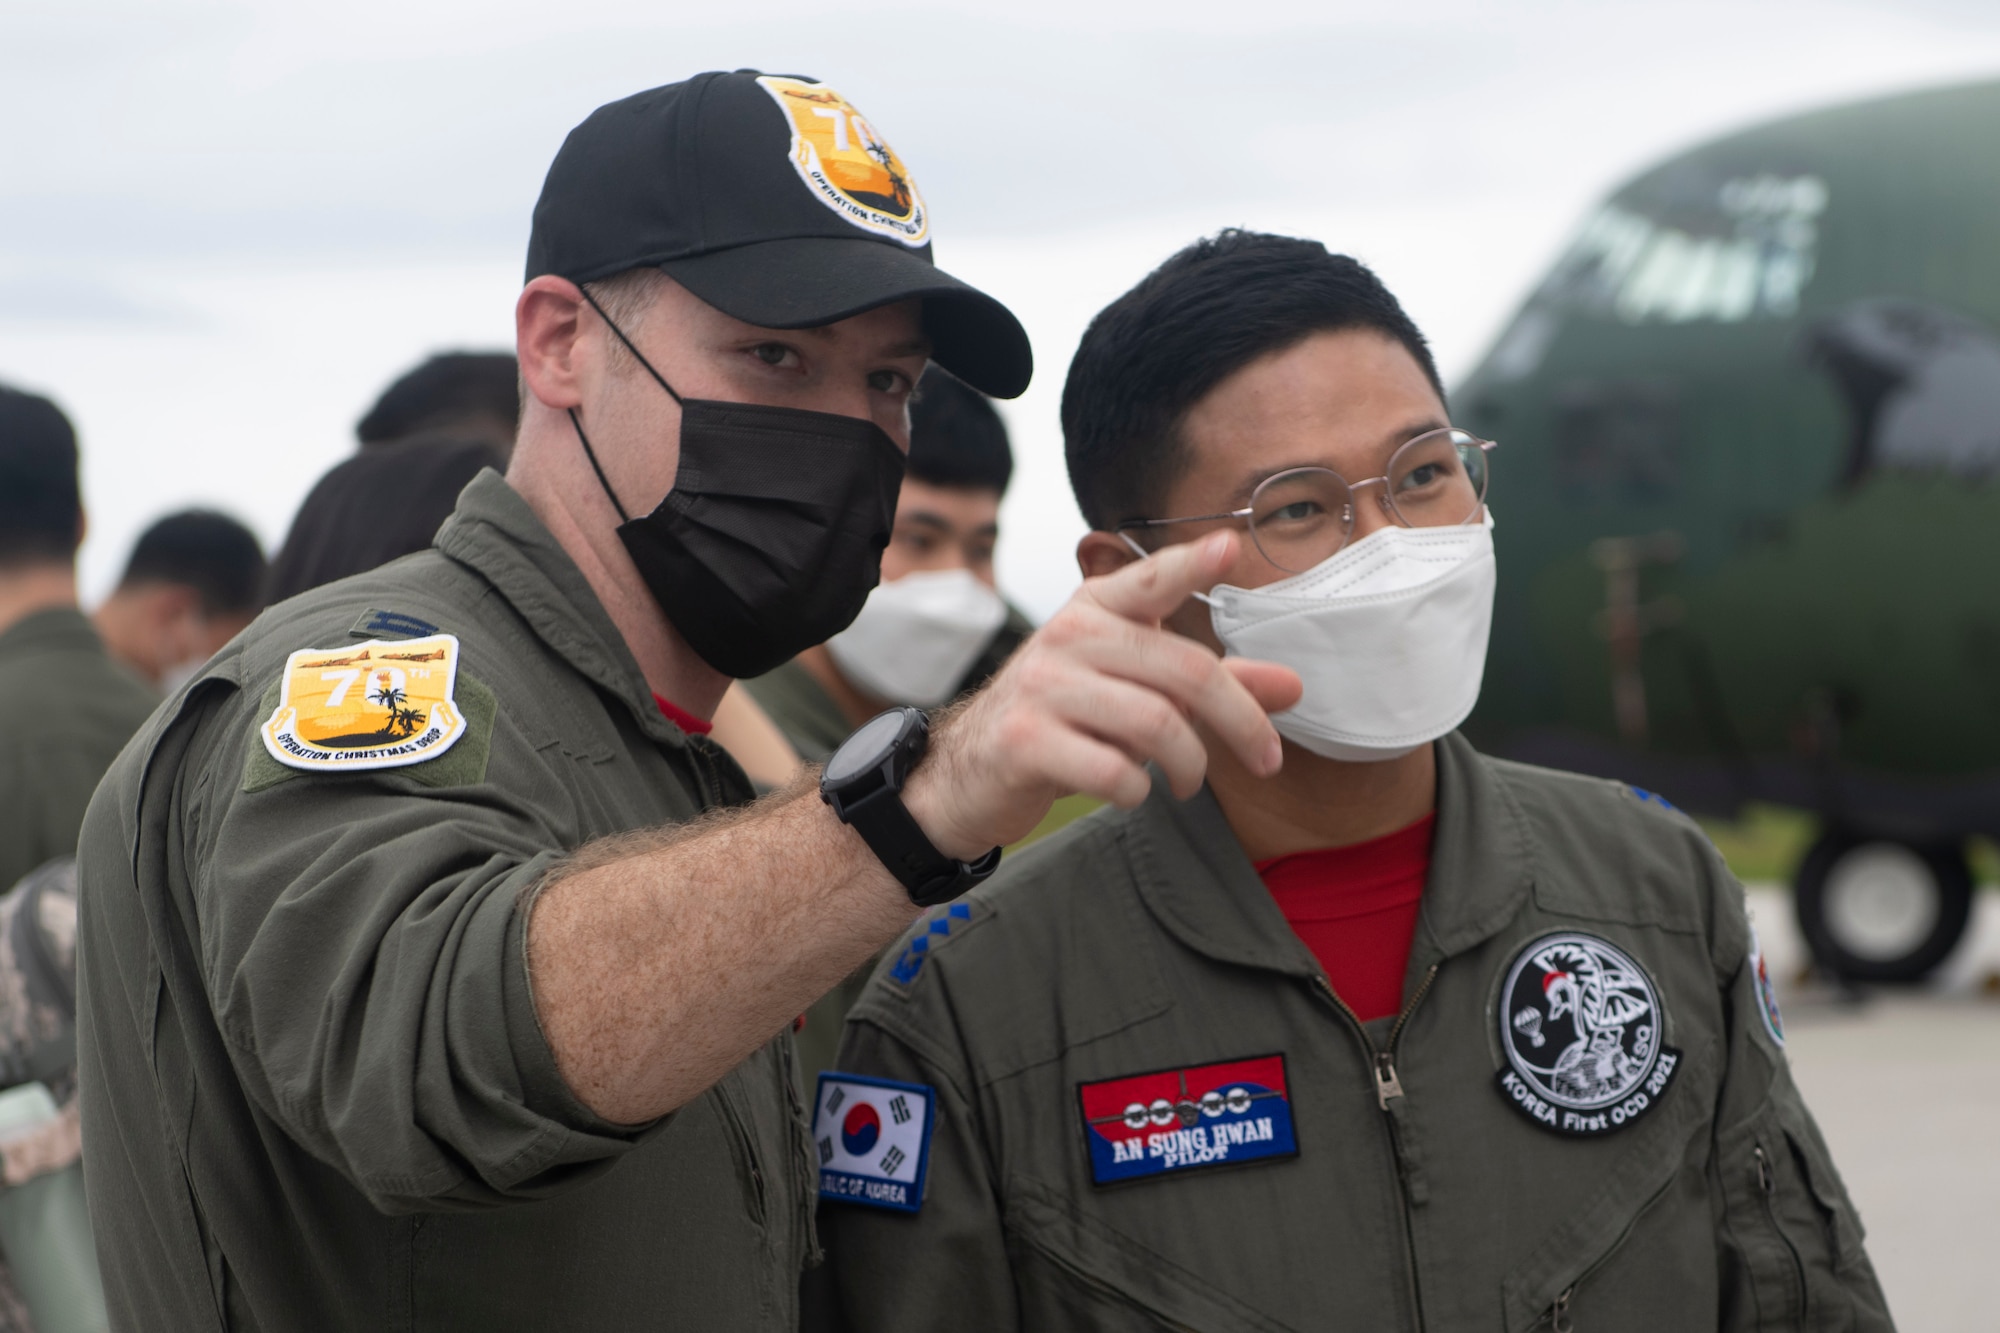 U.S. Air Force Capt. Alex Randall, 36th Airlift Squadron pilot and Operation Christmas Drop mission commander, left, and Republic of Korea Air Force Capt. An Sung Hwan, 251st Airlift Squadron pilot, meet after ROKAF’s arrival to Andersen Air Force Base, Guam, Dec. 1, 2021. Both the 374th Airlift Wing and 251st AS will provide support to more 20,000 islanders in the Federated States of Micronesia and Republic of Palau, during Operation Christmas Drop. (U.S. Air Force photo by Tech. Sgt. Joshua Edwards)